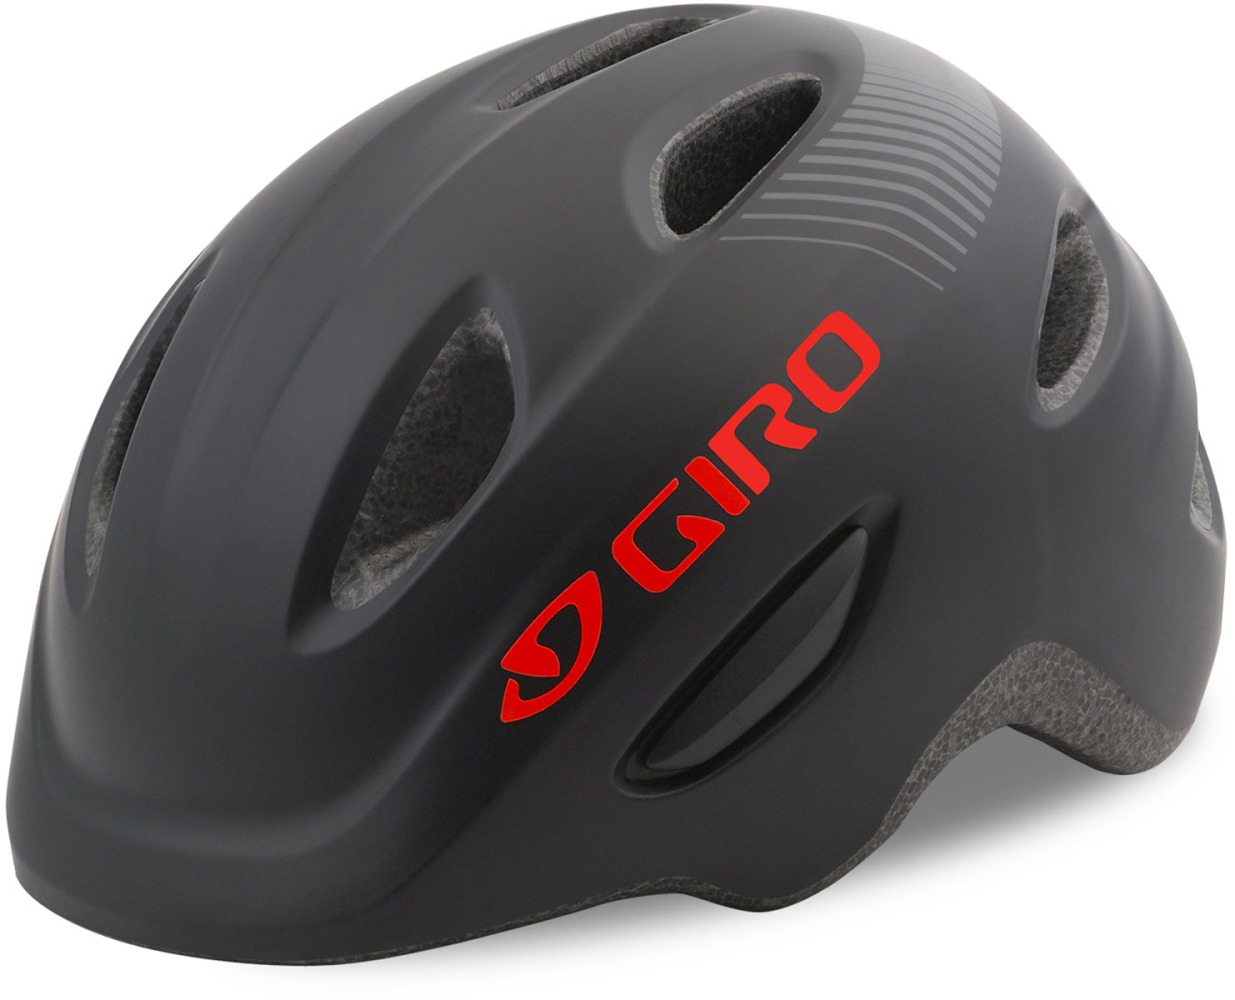 Best helmets for babies and toddlers: Front side angle view of the Giro Scamp 2 helmet in black